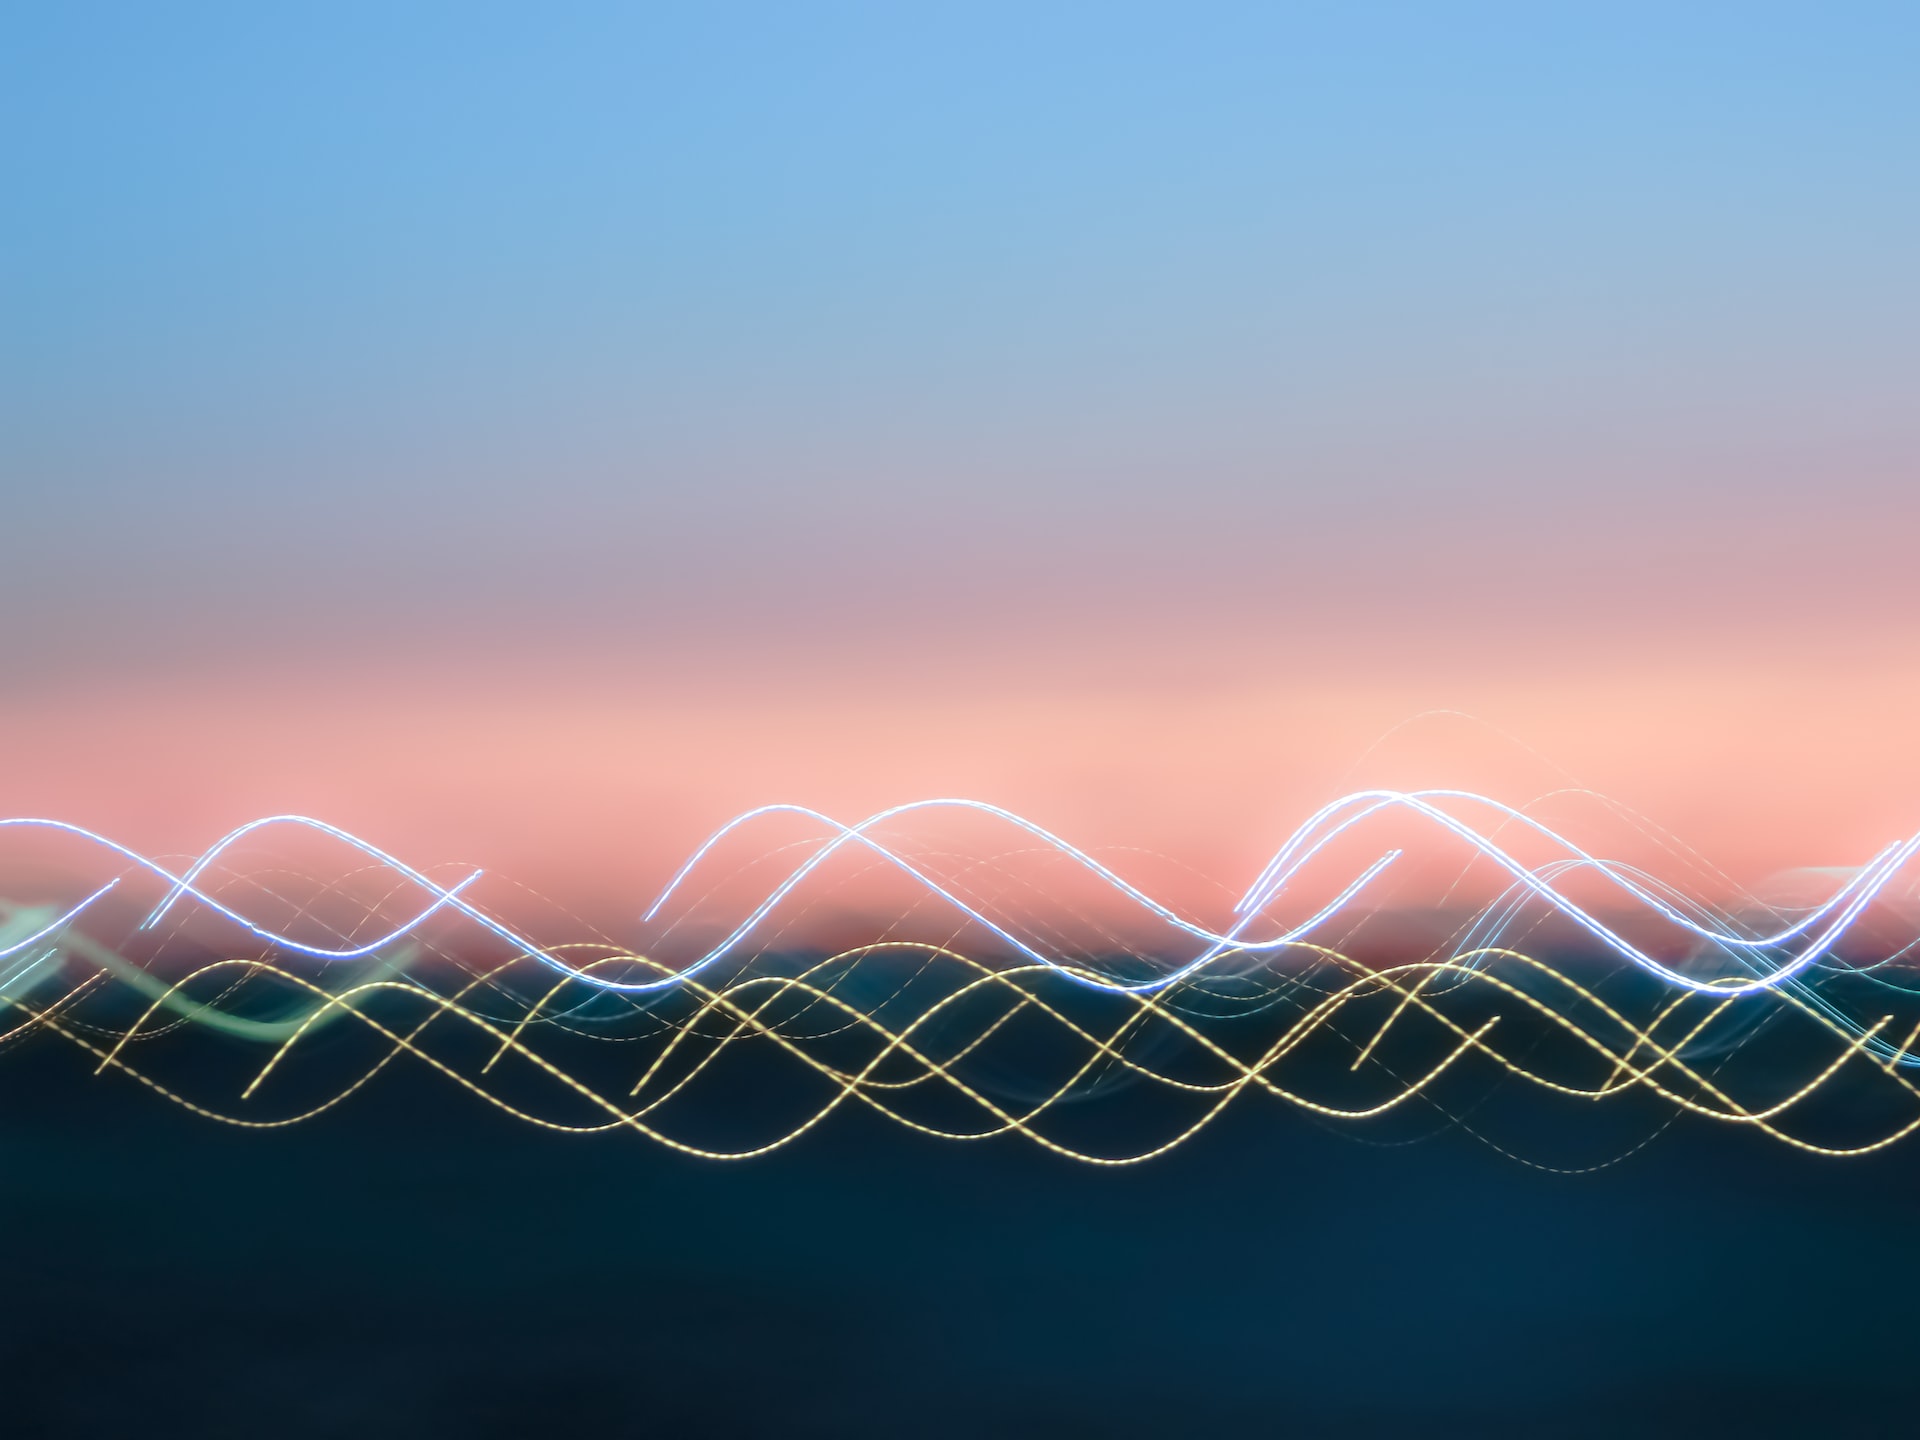 Yellow and white light waves infront of a blurred sunset